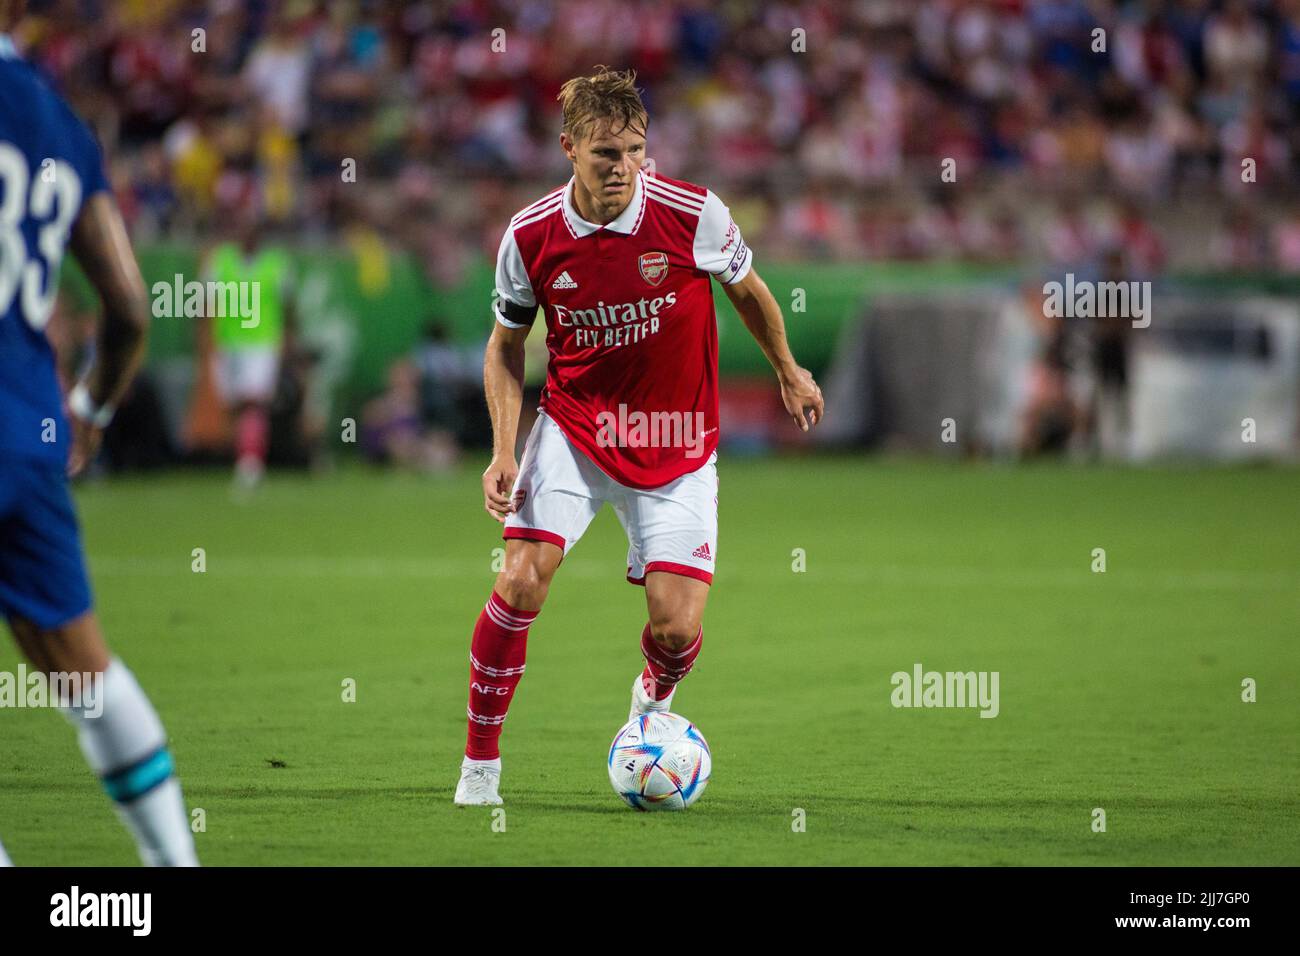 July 23, 2022: Arsenal FC midfielder Martin Odegaard (8) looks for an opening during the Florida Cup match between Arsenal FC and Chelsea FC Orlando, FL. Jonathan Huff/CSM. Stock Photo